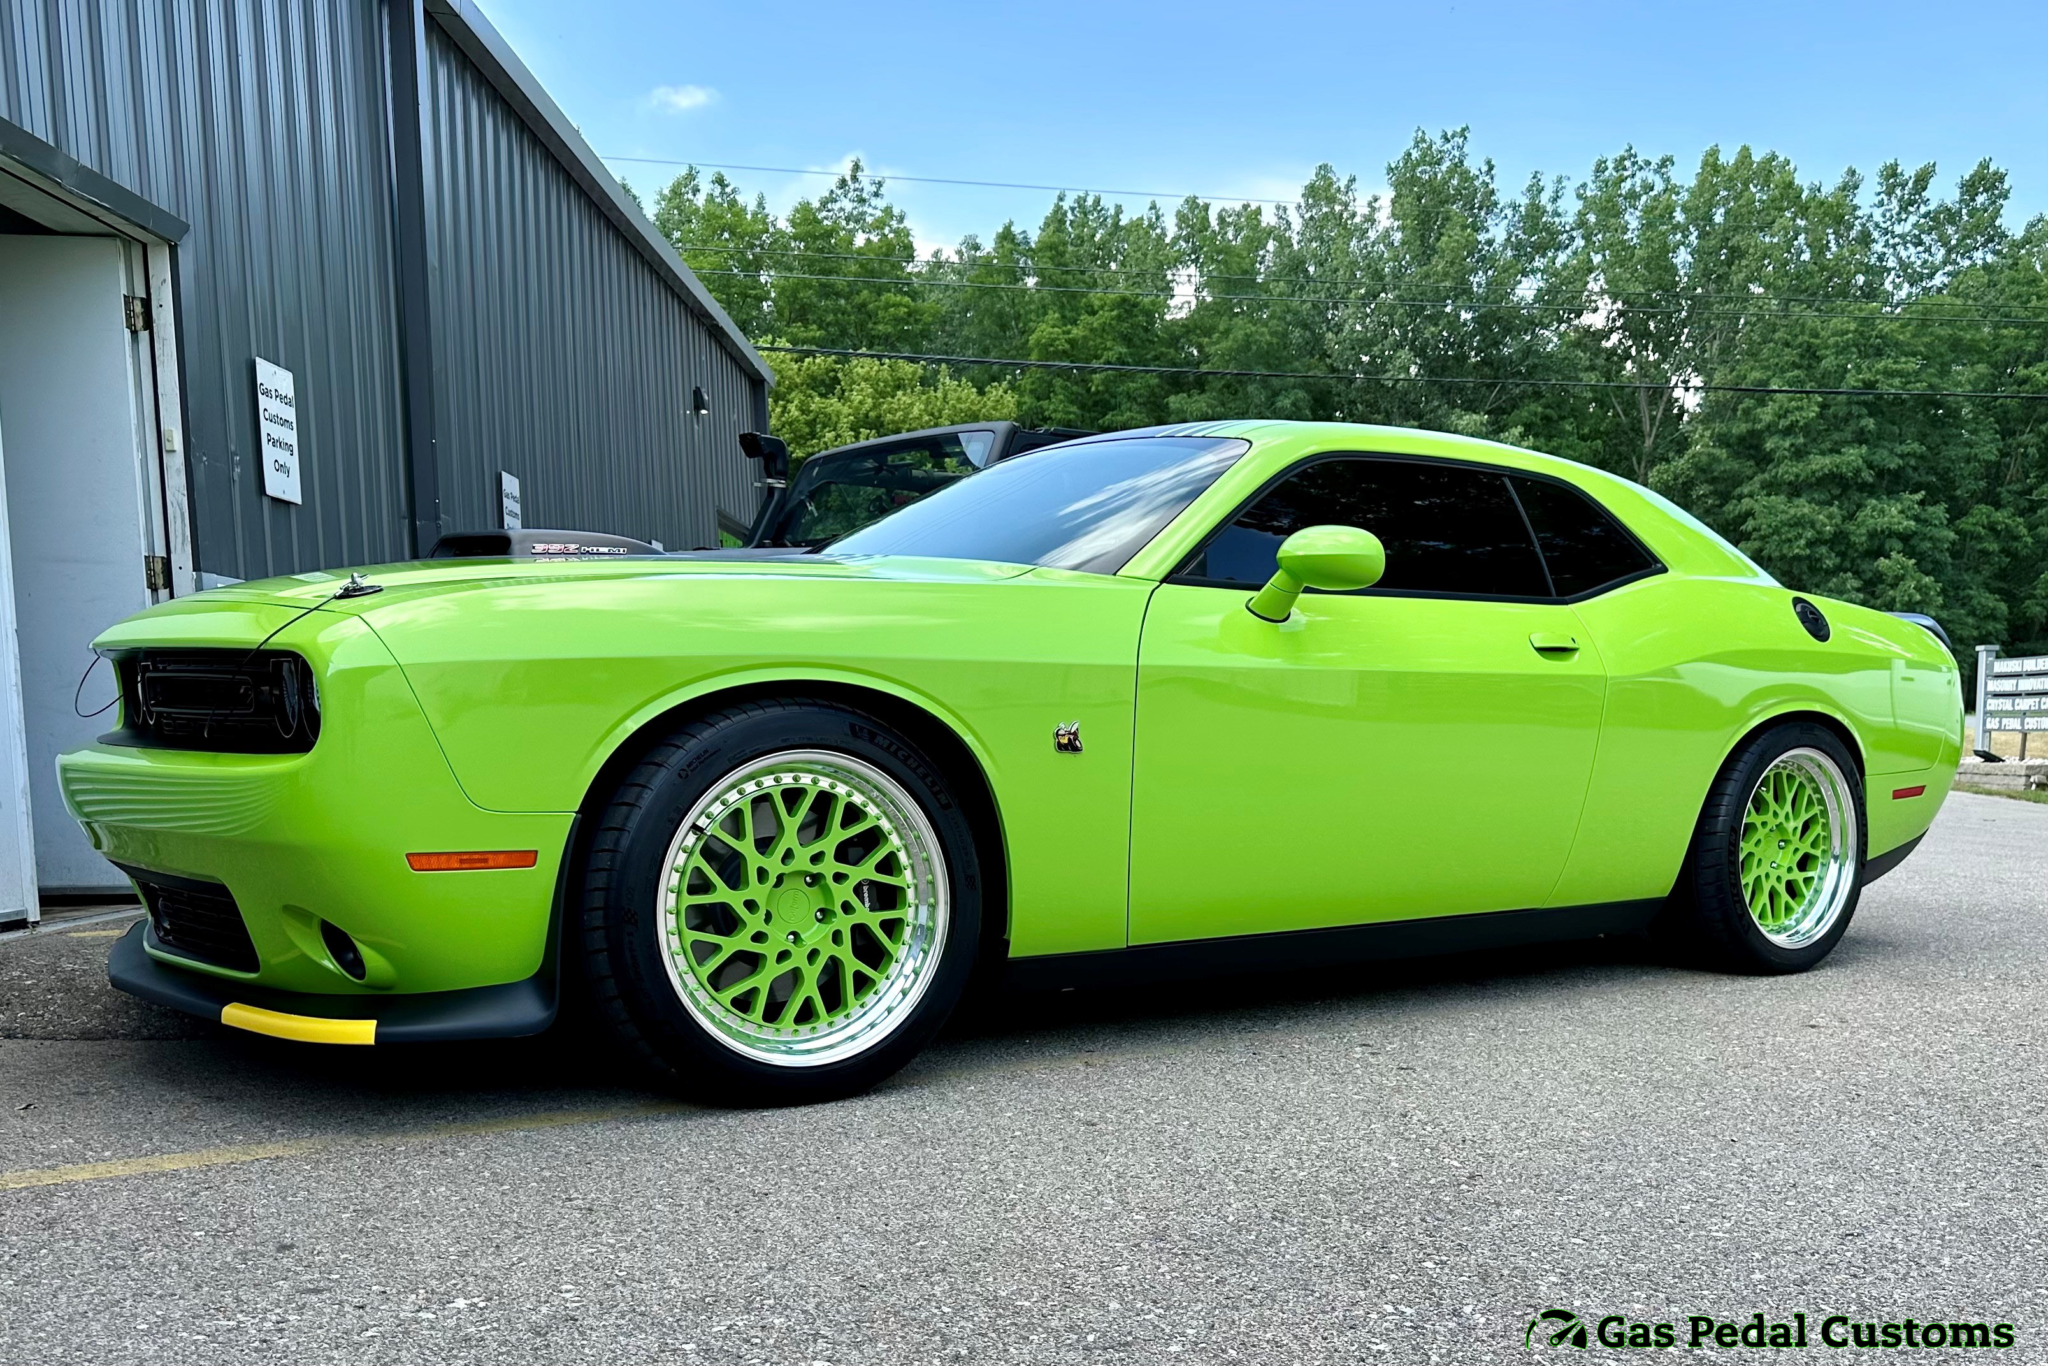 Challenger 392 Scat Pack Shaker lowered, staggered 20" Rotiform 3-piece wheels, Michelin tires, and Borla ATAK exhaust. 